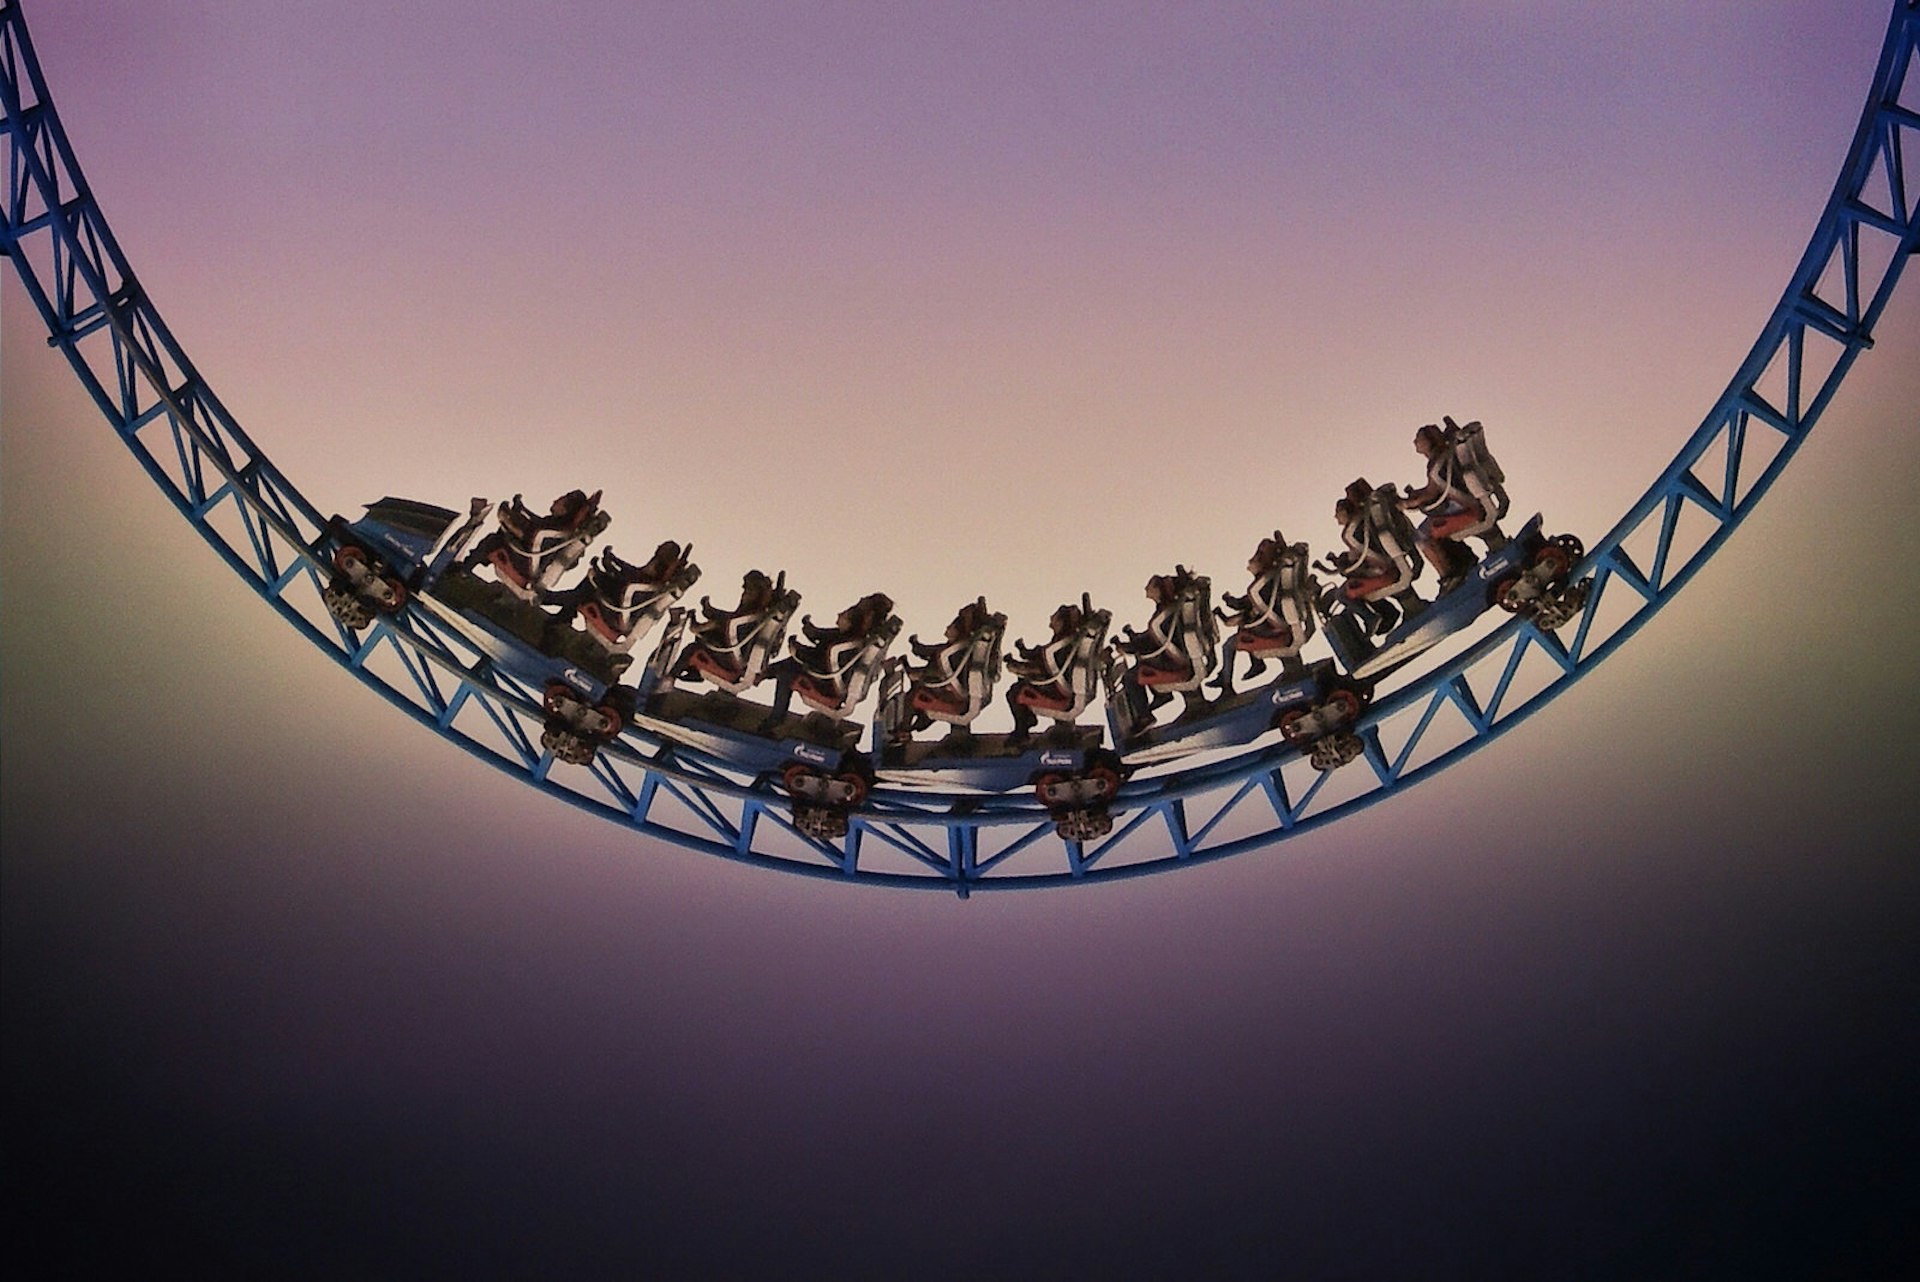 Low angle view of people on a roller coaster nearly silhouetted by the sky